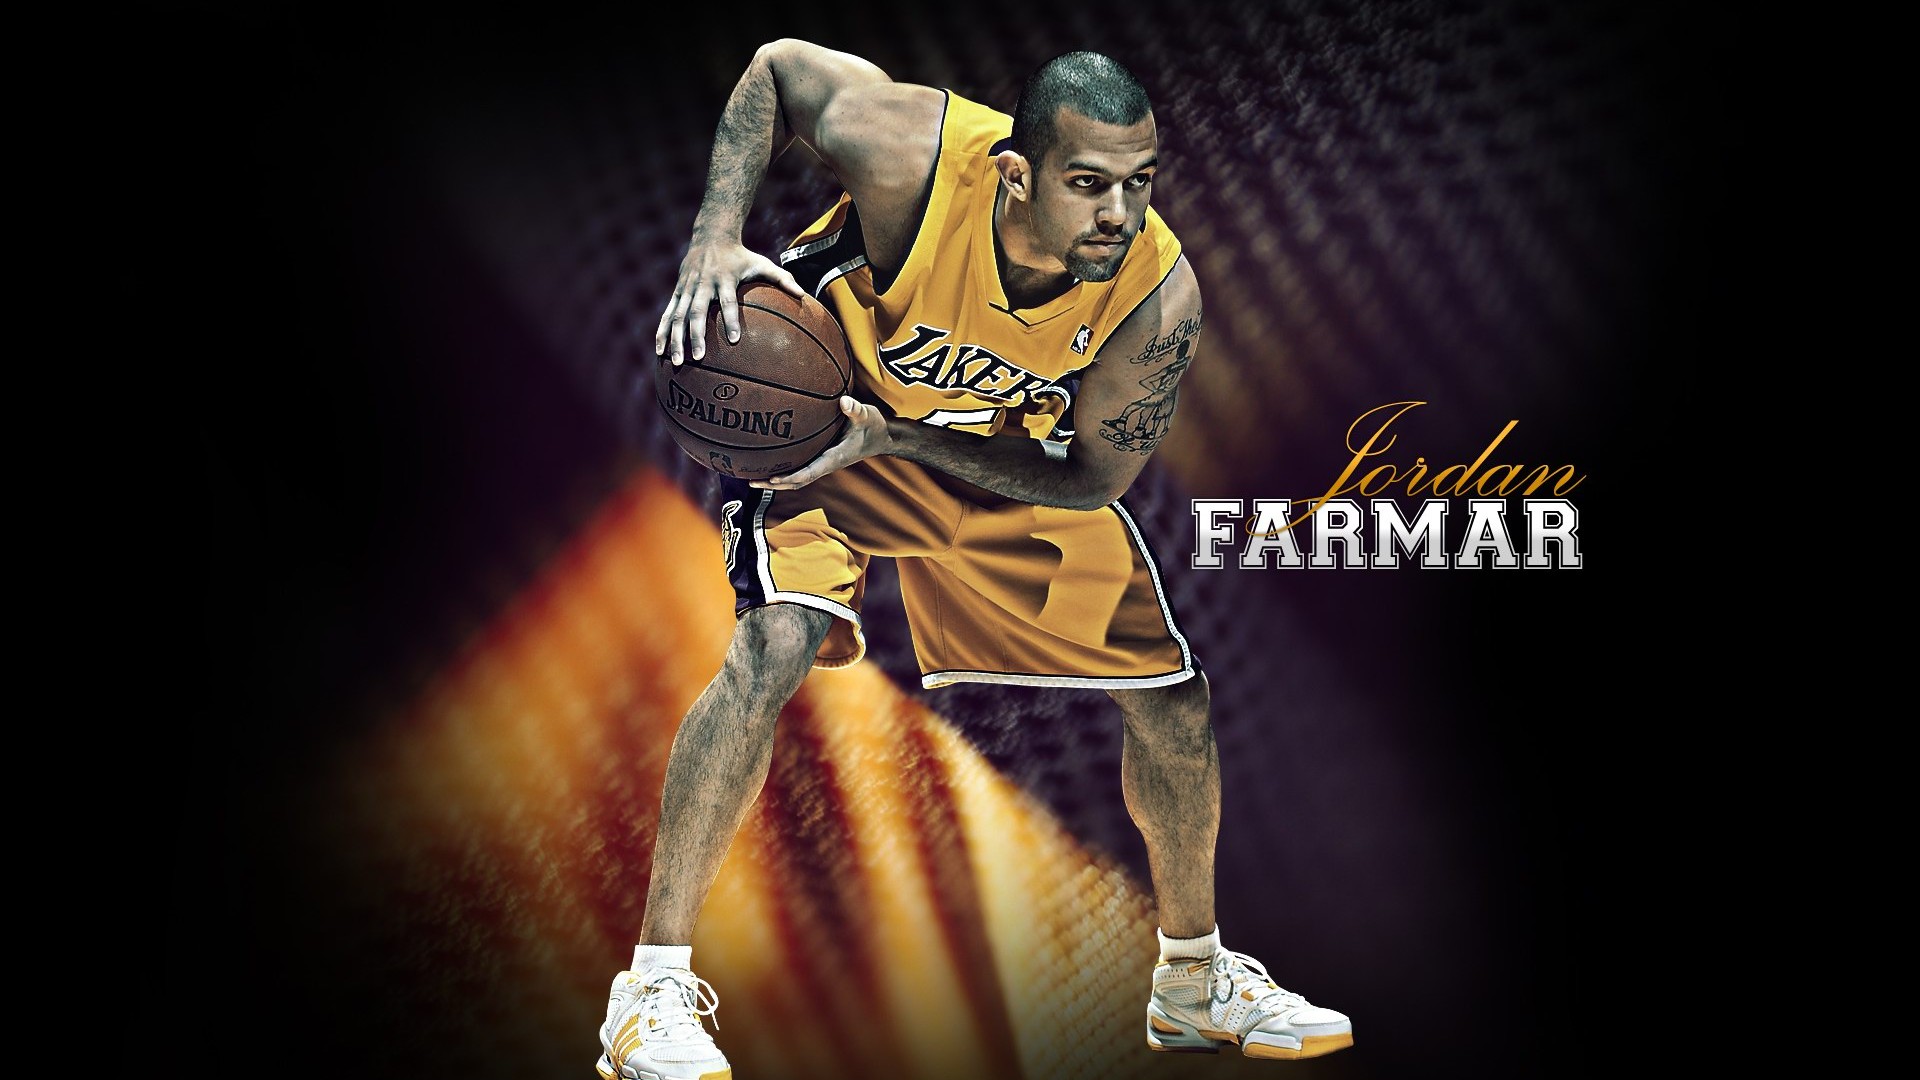 Los Angeles Lakers Official Wallpaper #10 - 1920x1080